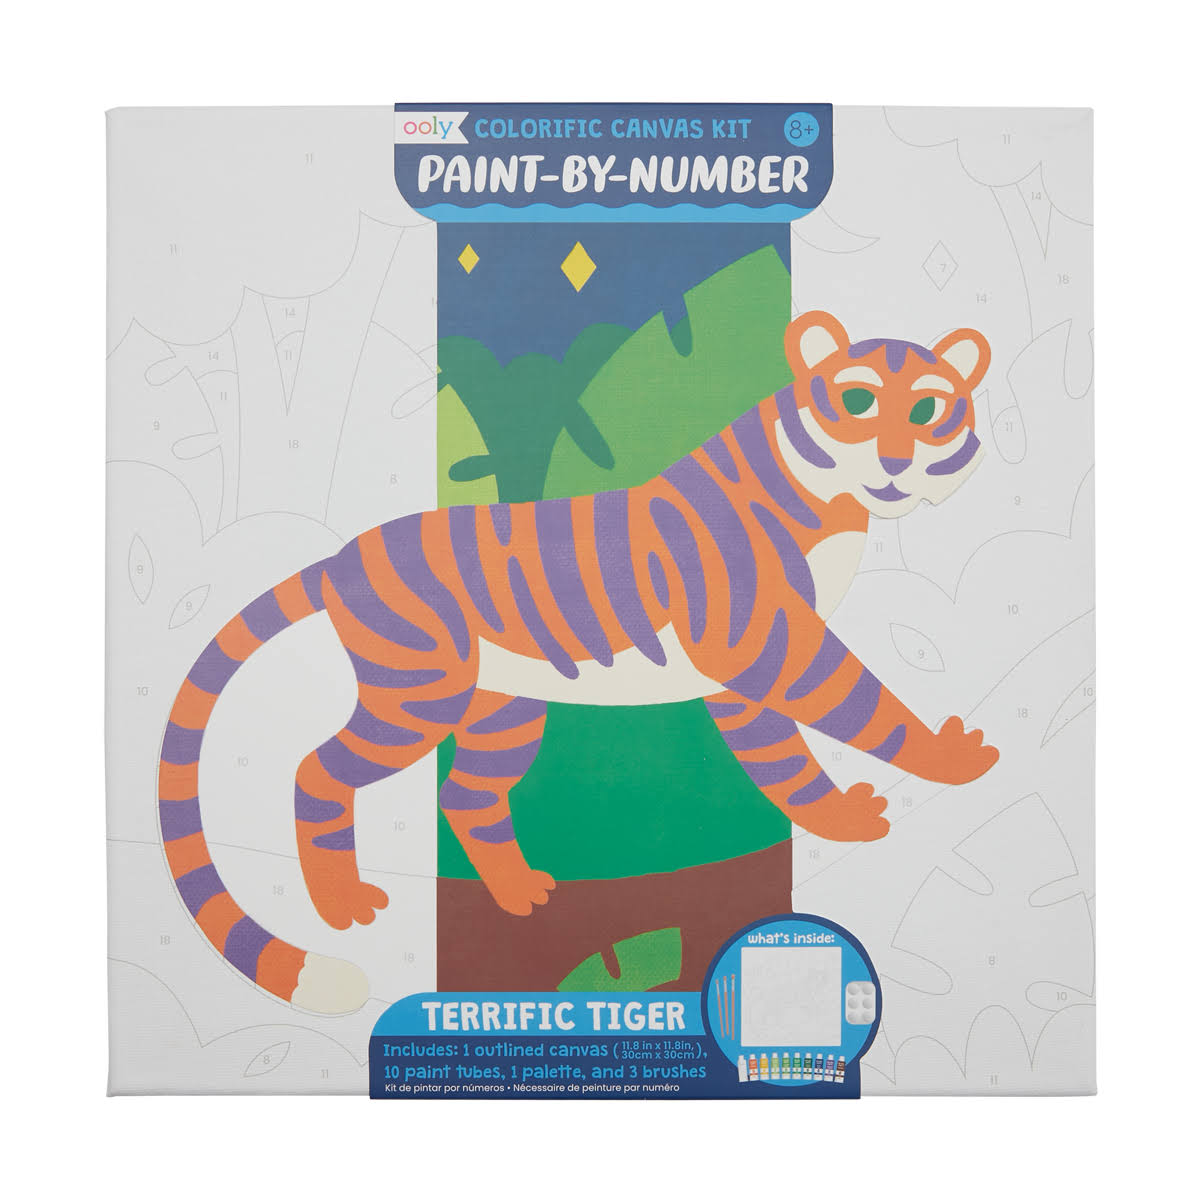 OOLY Colorific Canvas Paint by Number Kit - Terrific Tiger